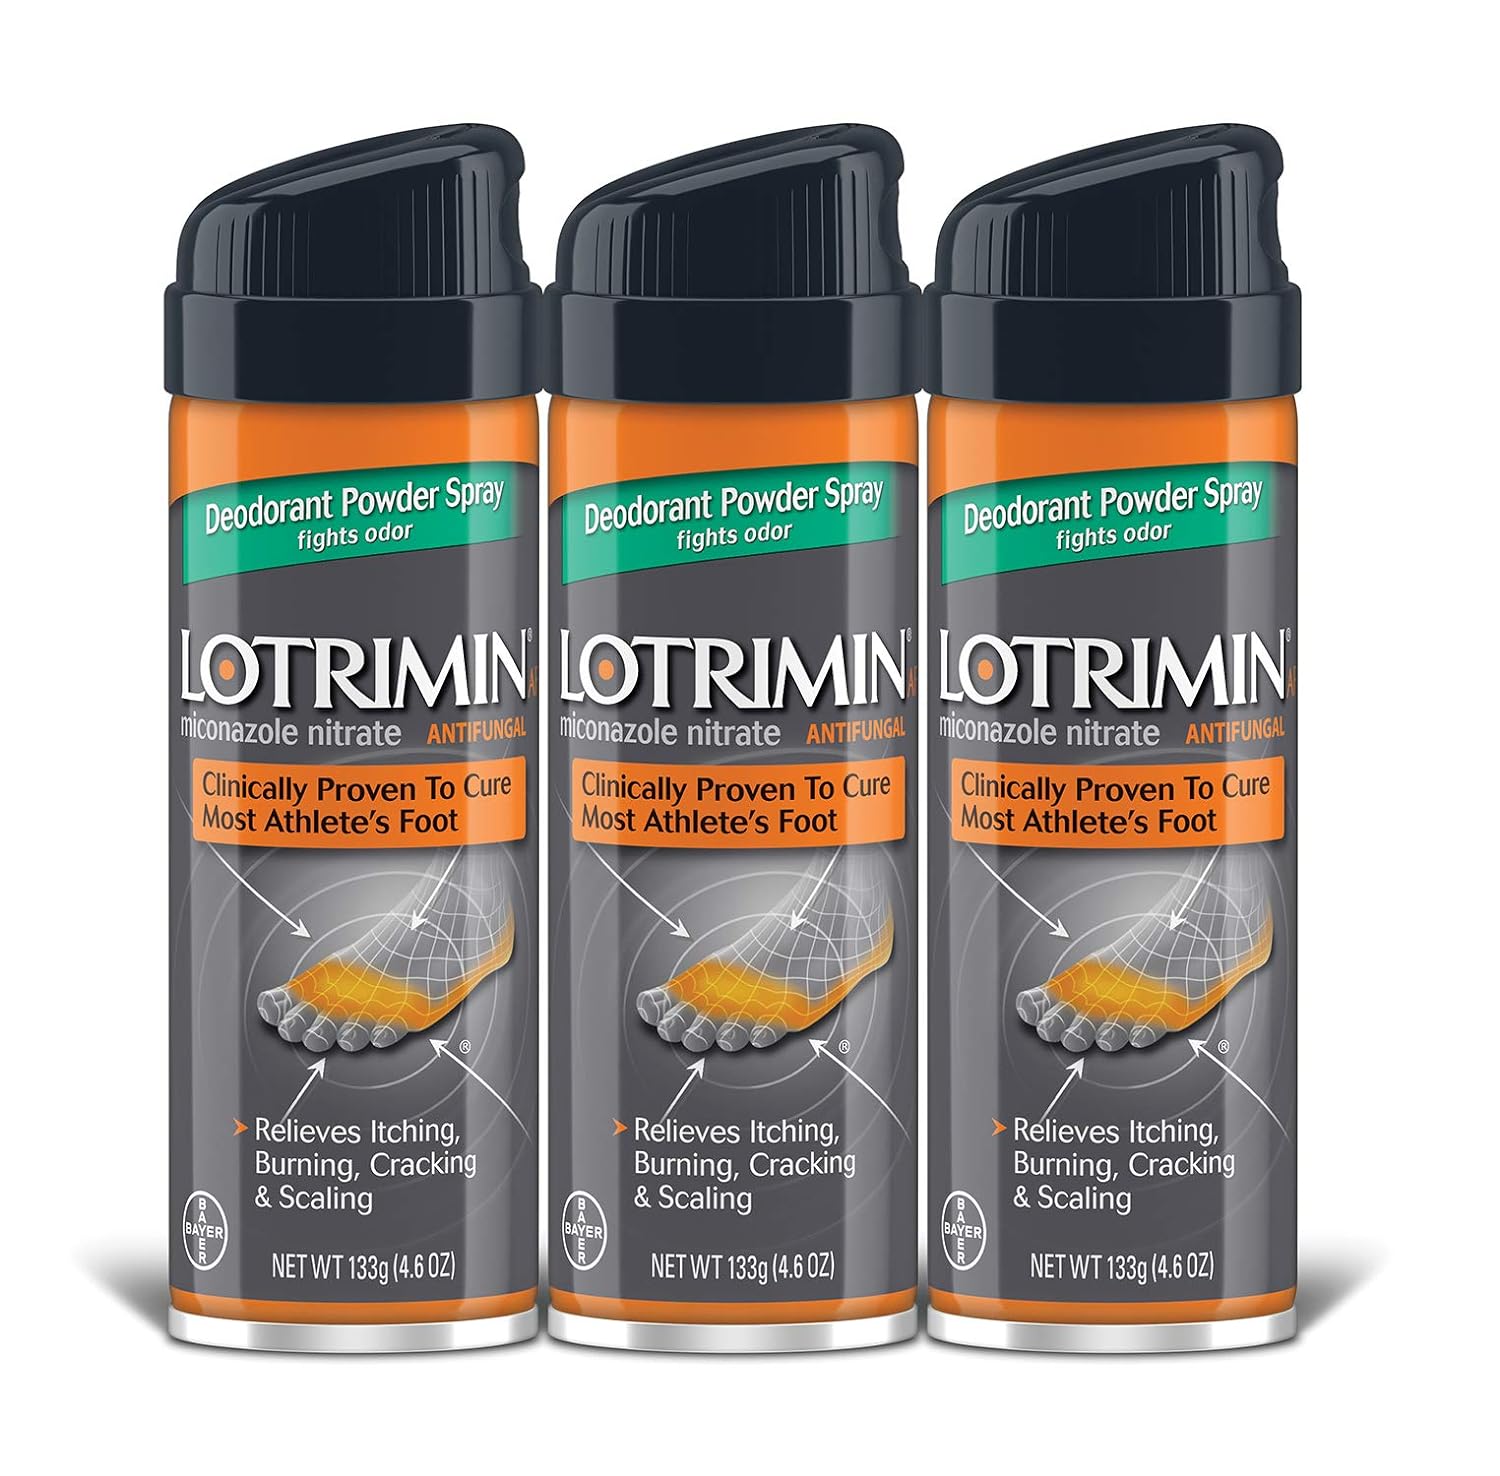 $17.12 /w S&S: Lotrimin Athlete's Foot Antifungal Powder Spray - Pack of 3, 4.6oz Cans